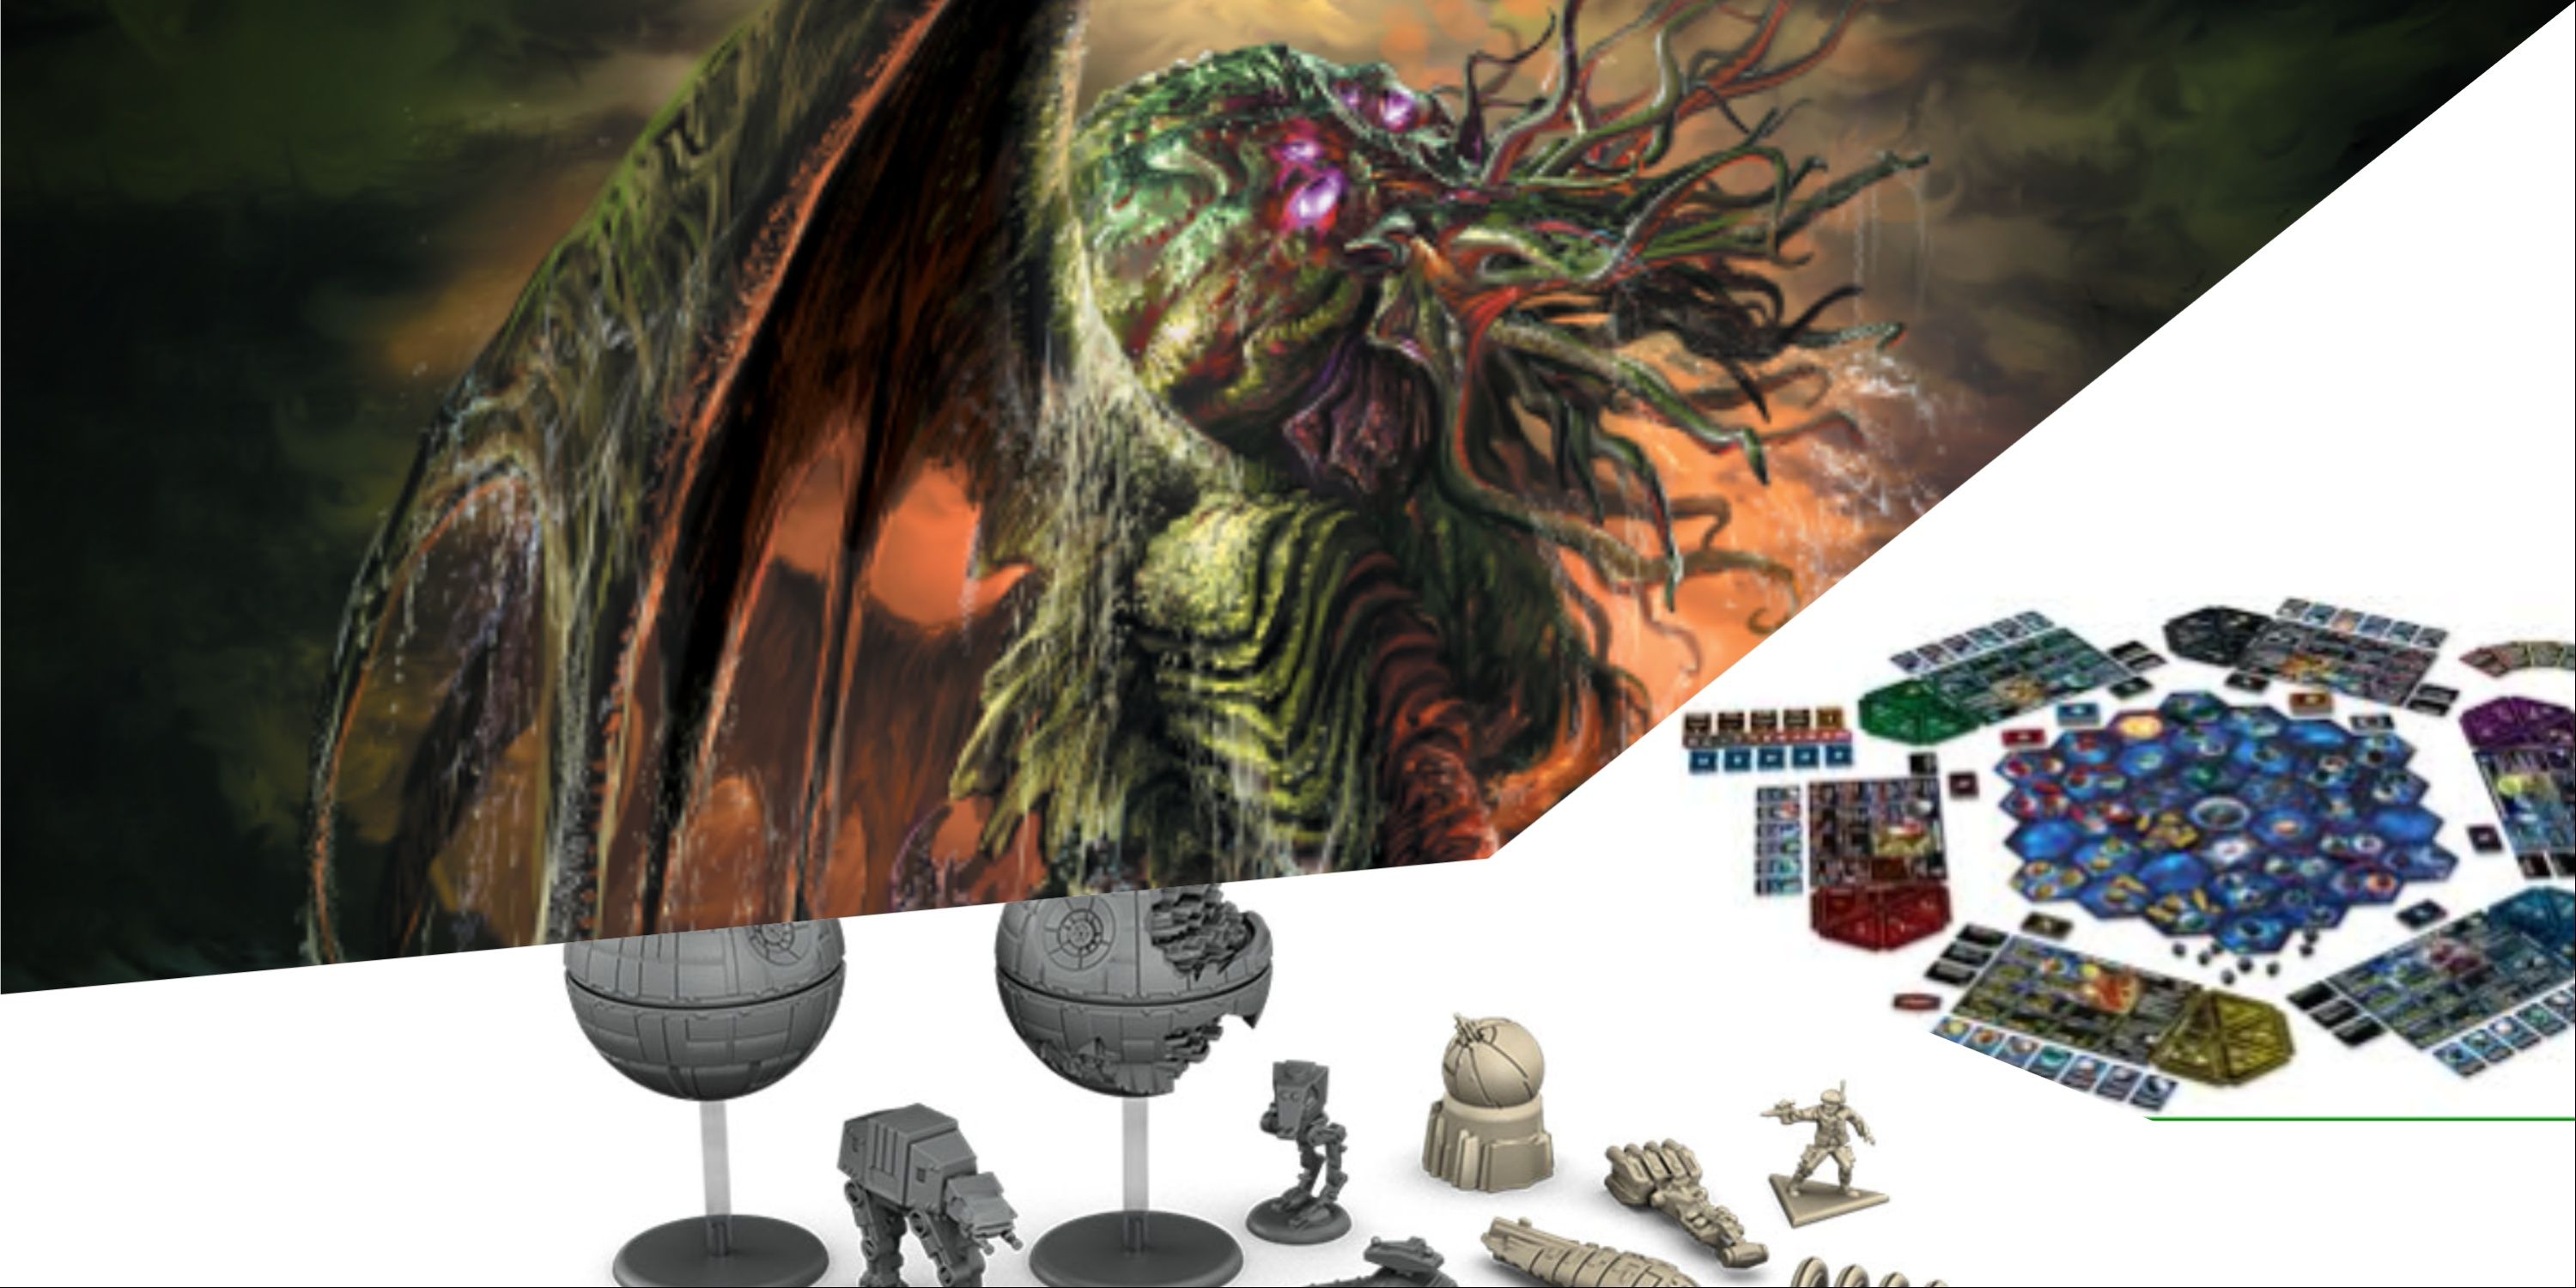 9 best Games Published By Fantasy Flight - Stars Wars Rebellion Components, Twilight imperium set Up and FF Cthulhu Art